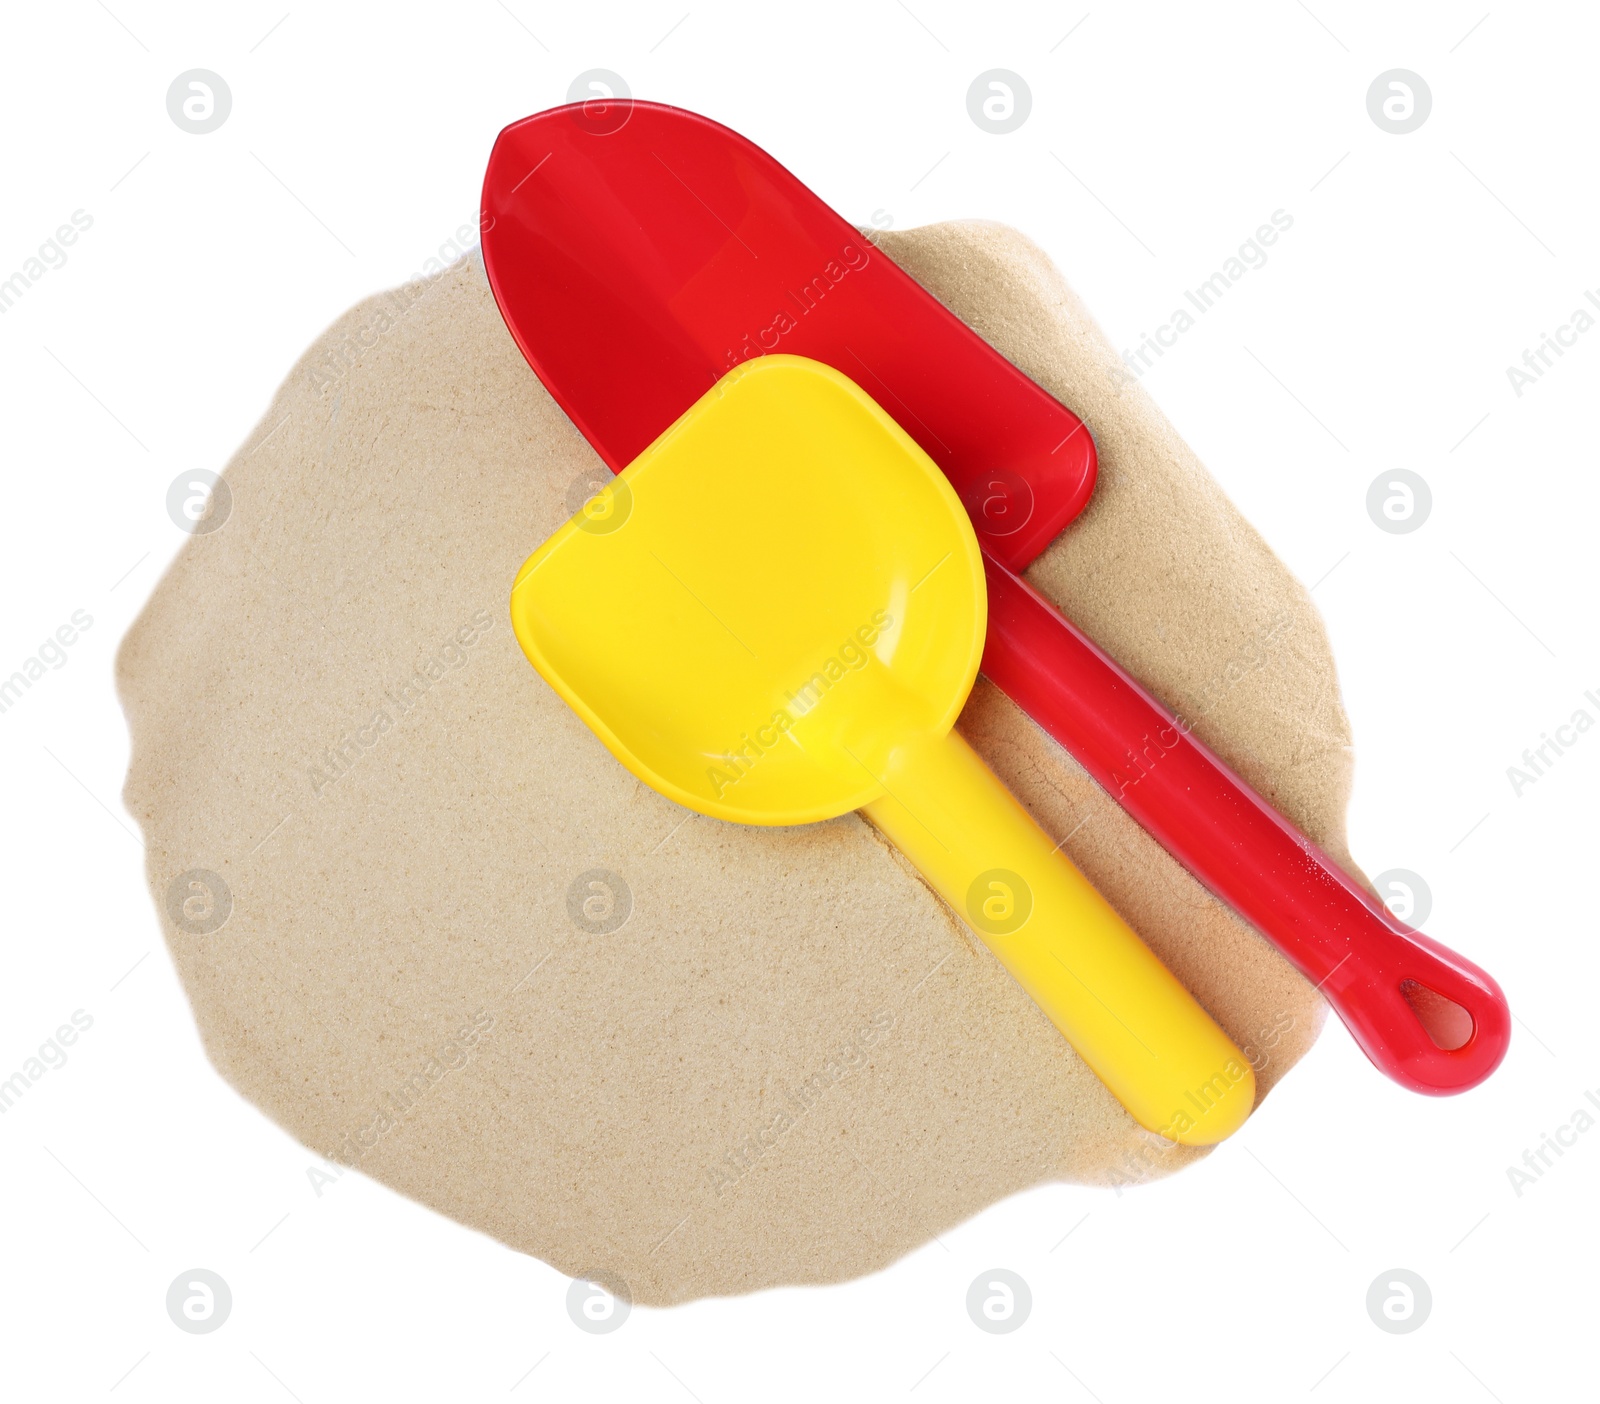 Photo of Plastic toy shovels and pile of sand on white background, top view